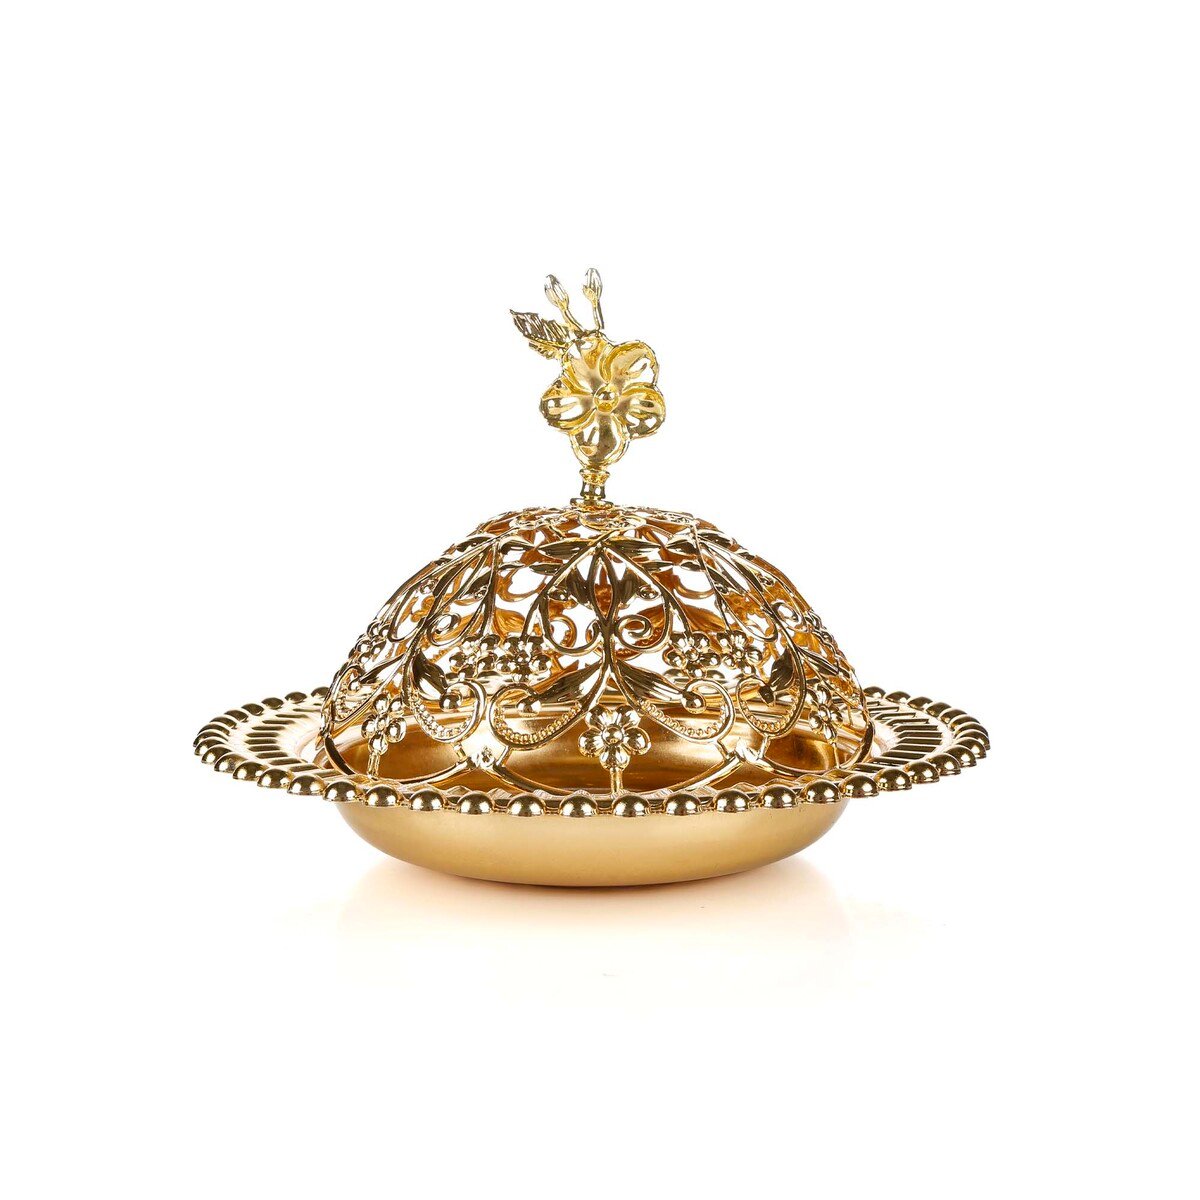 Glascom Decorative Gold Plated Bowl With Lid, FV20